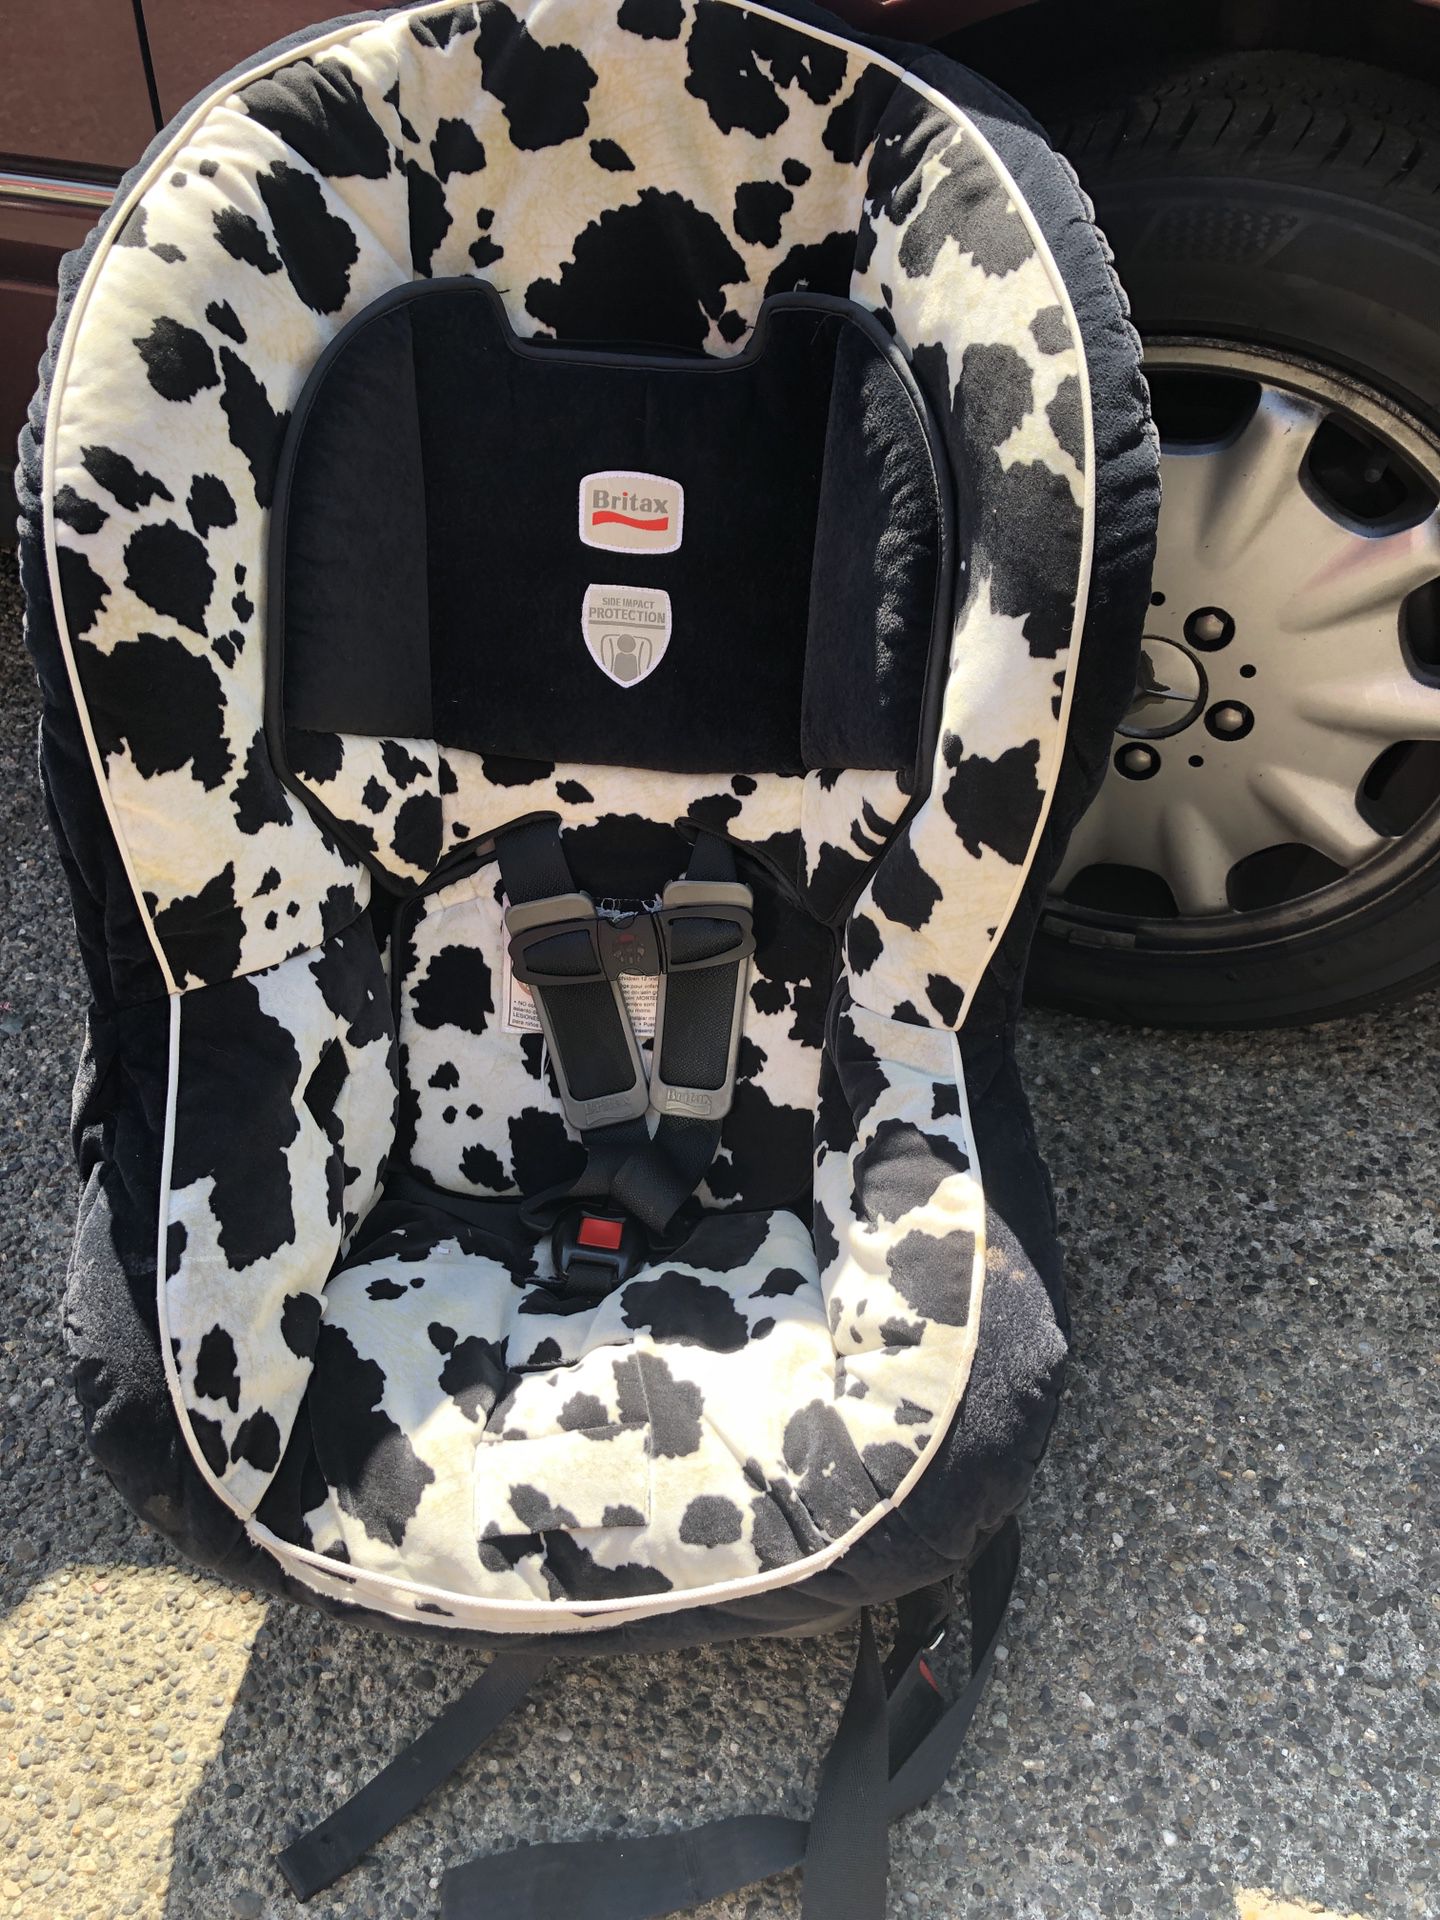 BRITAX COW CAR SEAT VERY SAFE QUALITY!!